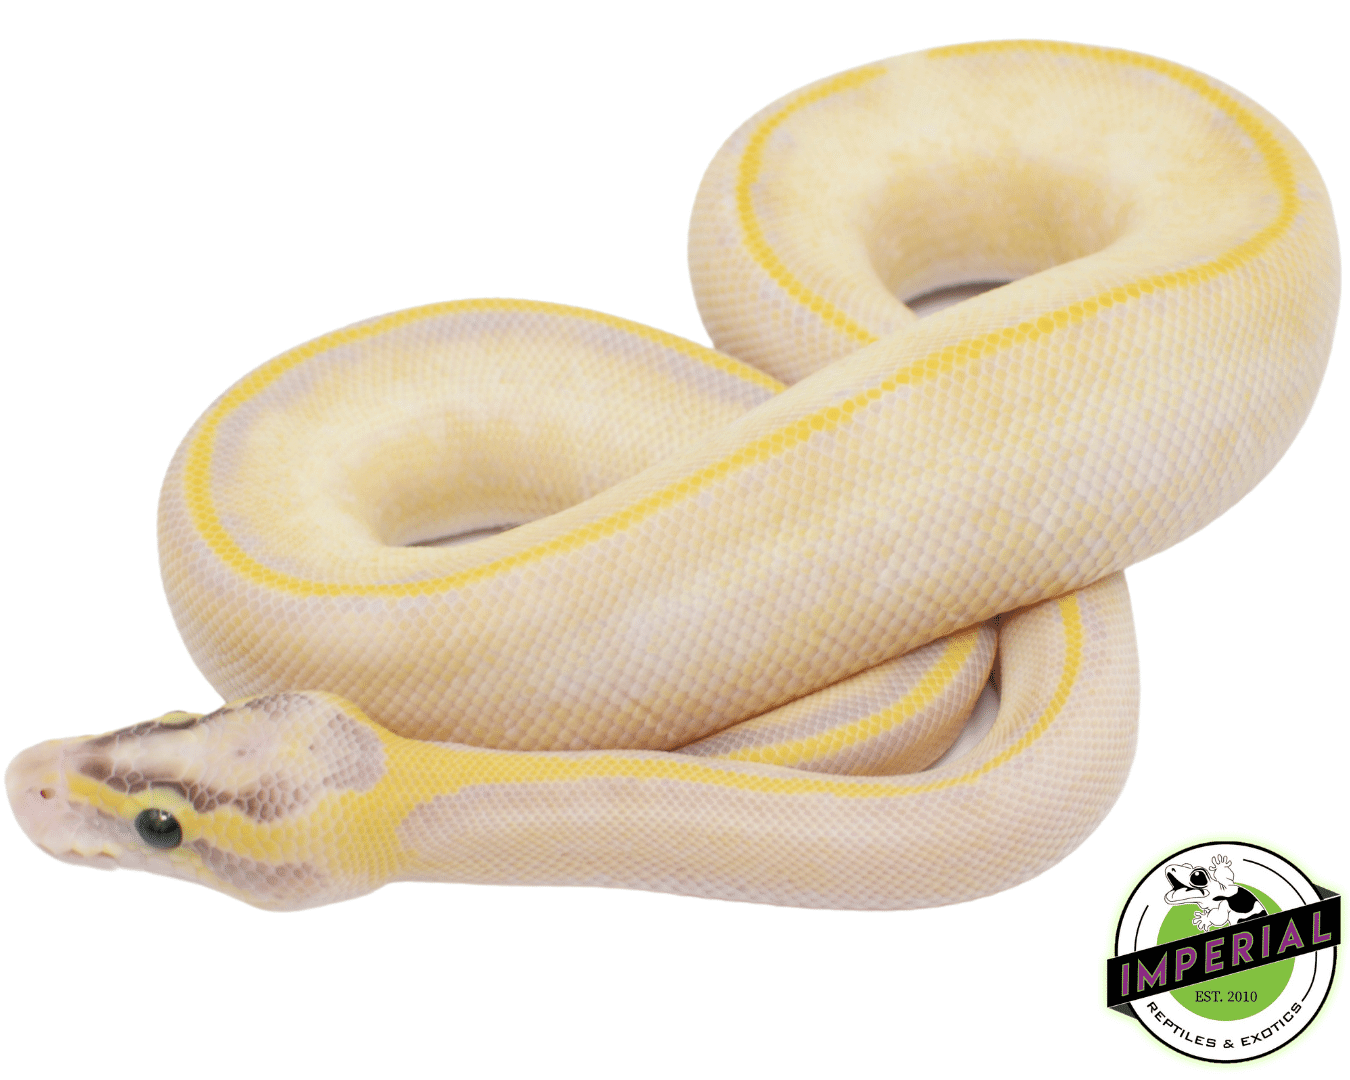 Pastel Enchi Ivory ball python for sale, buy ball pythons online at cheap prices